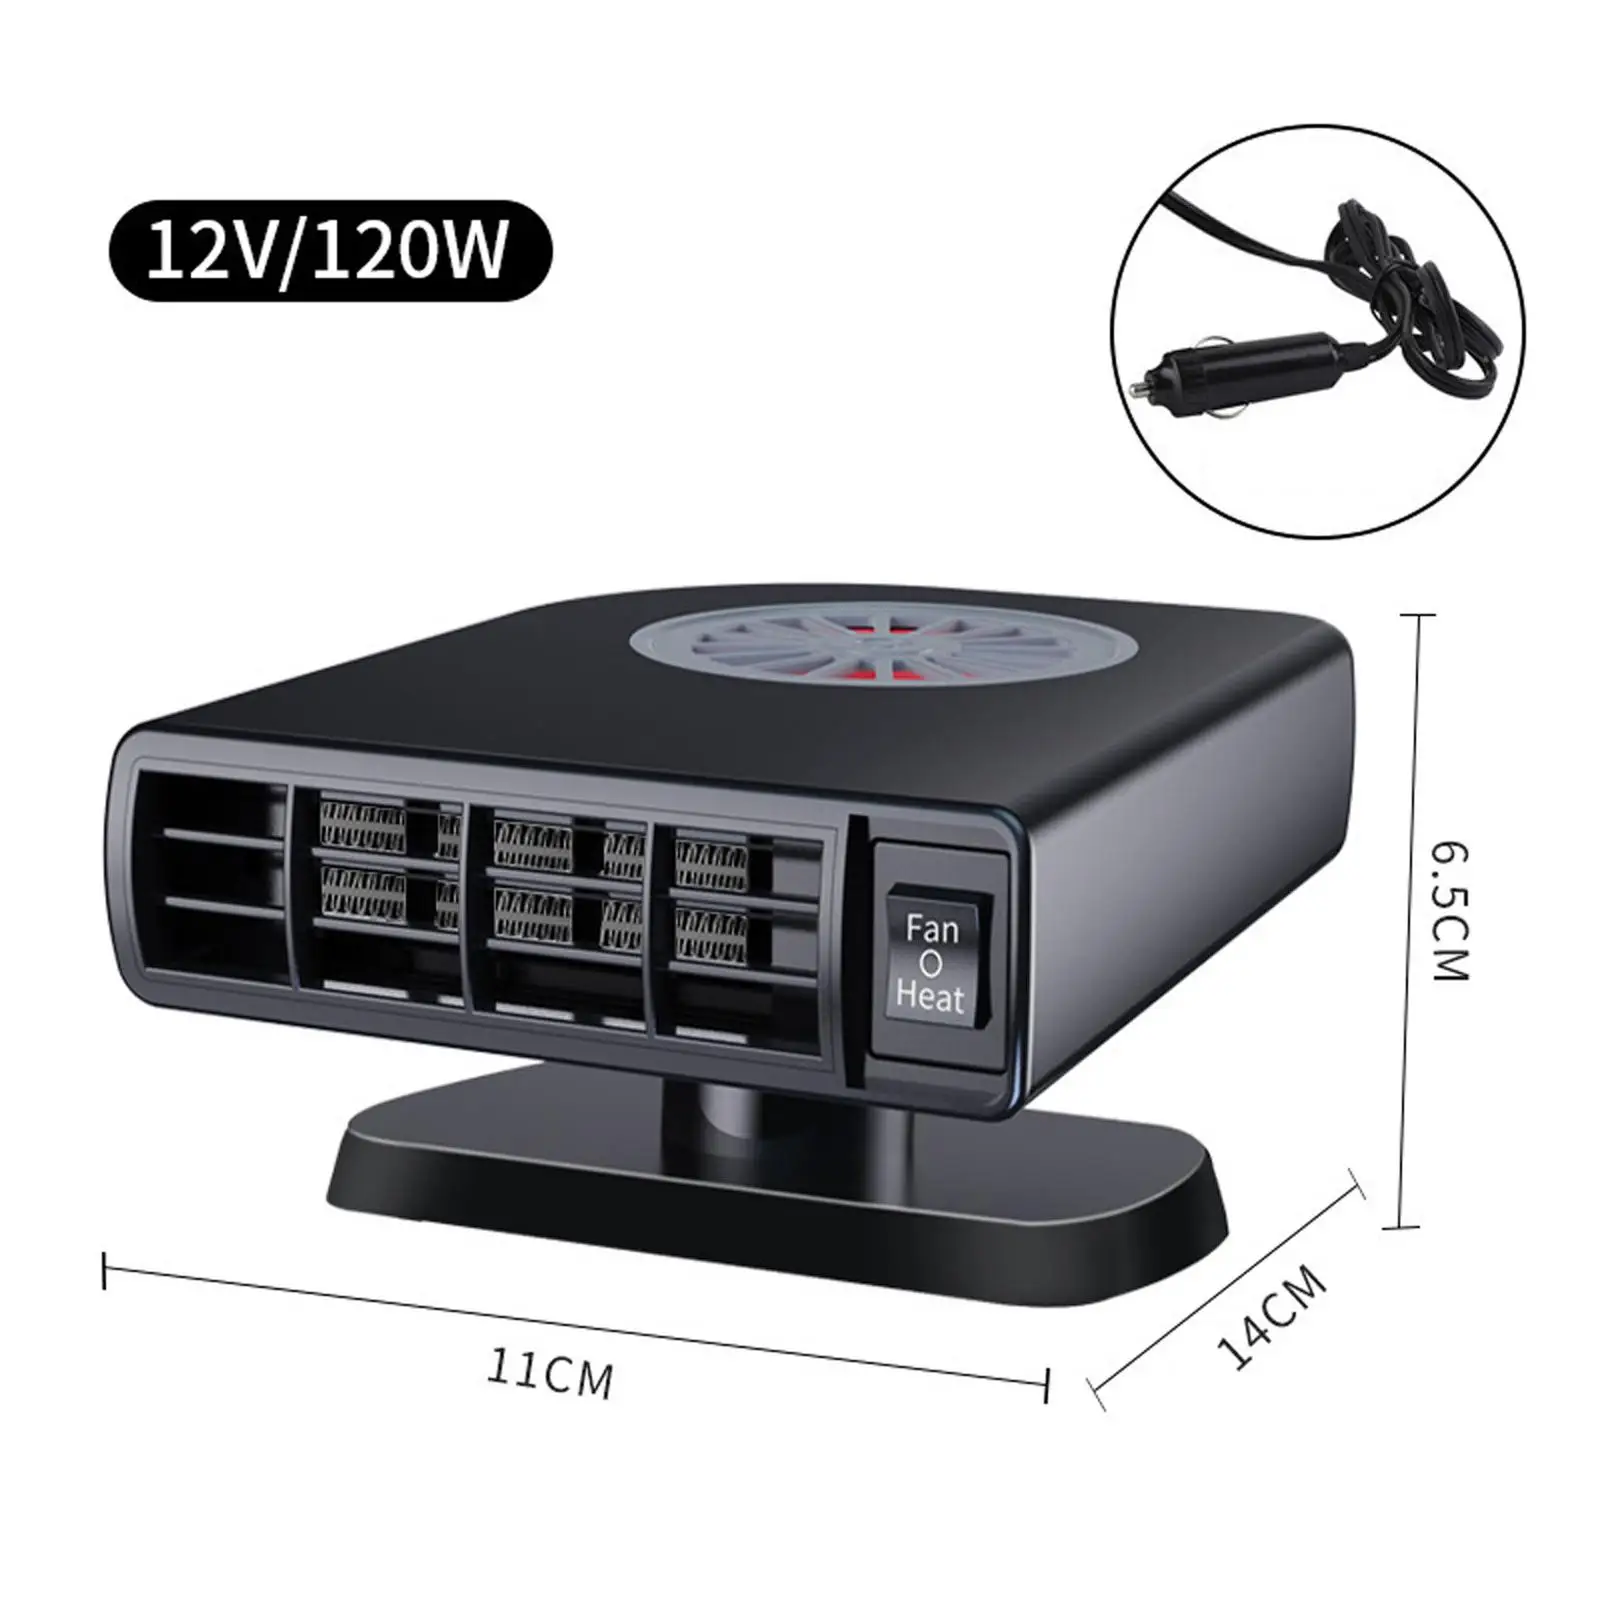 2 12V 120W Purify Heater 2 Gear Rotatable for Automobile RV Vehicle